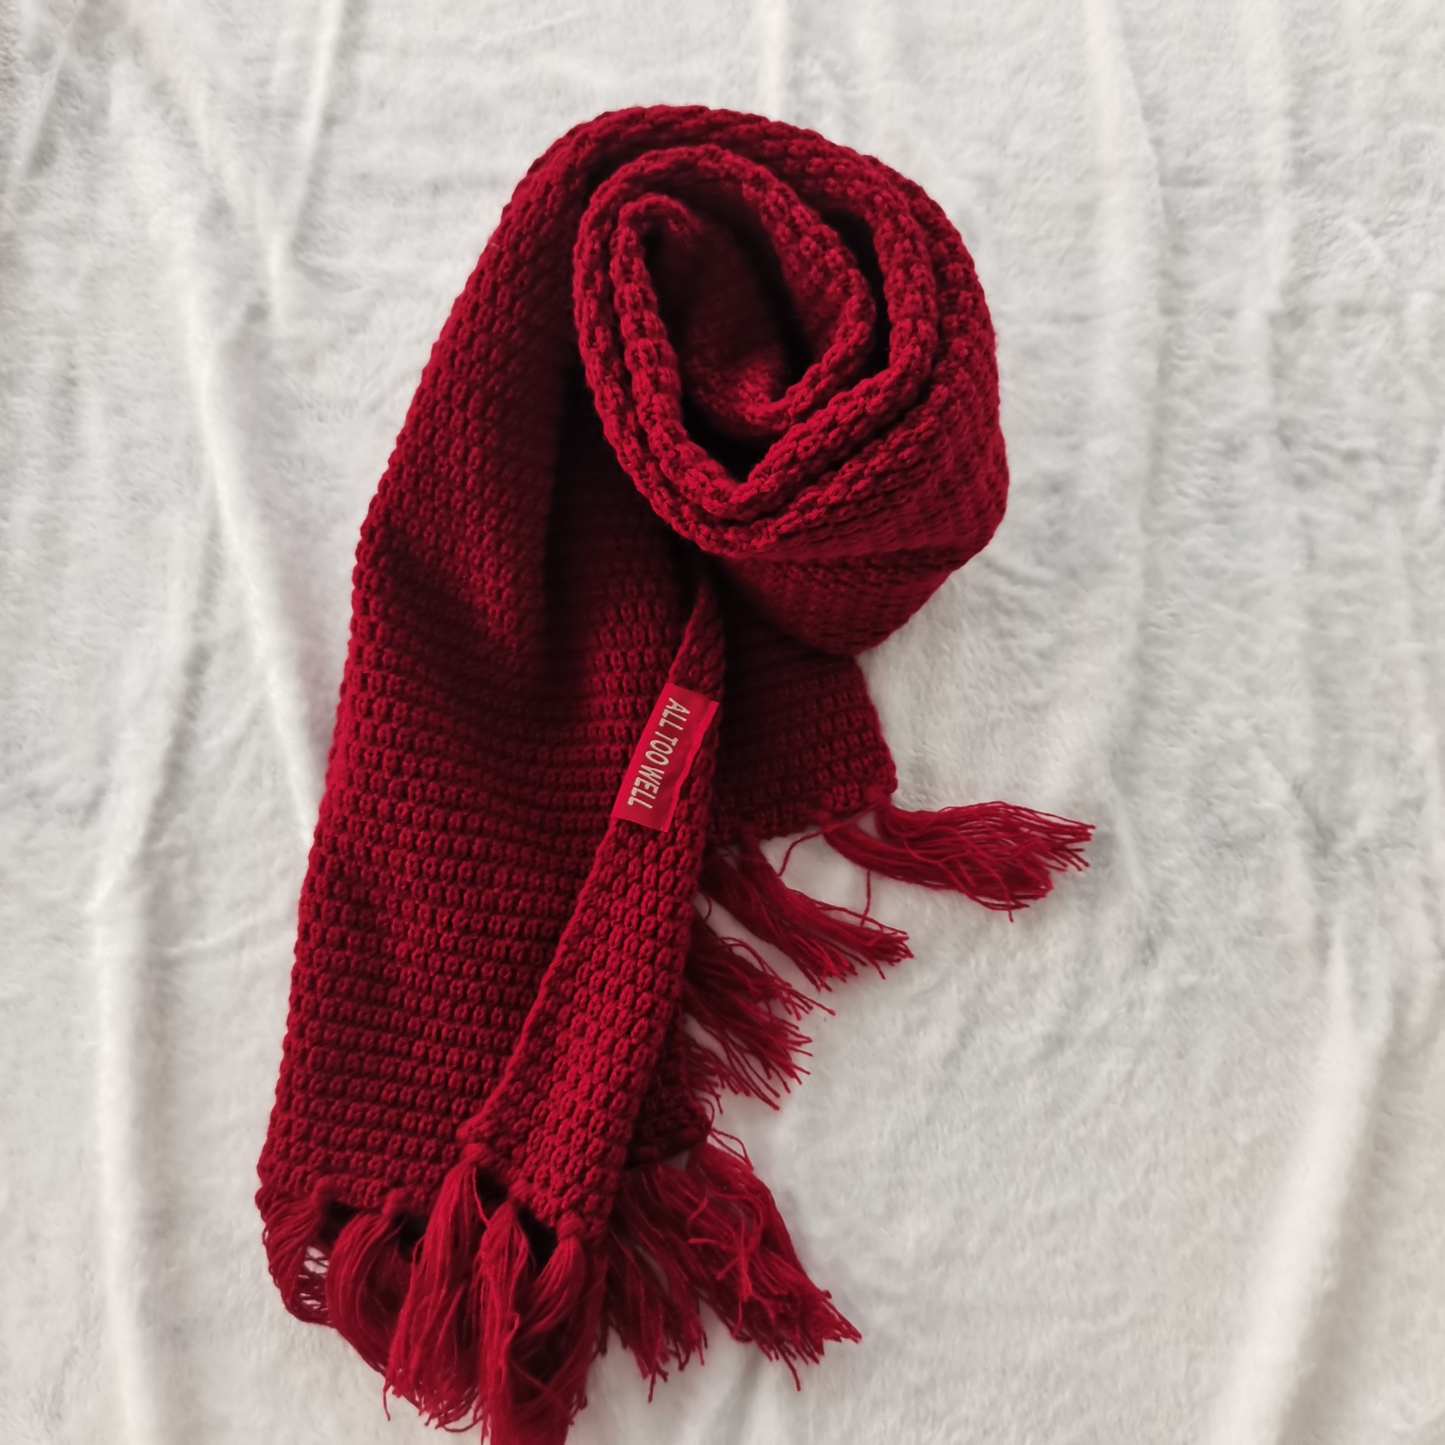 red taylor swift scarf, taylor swift scarf